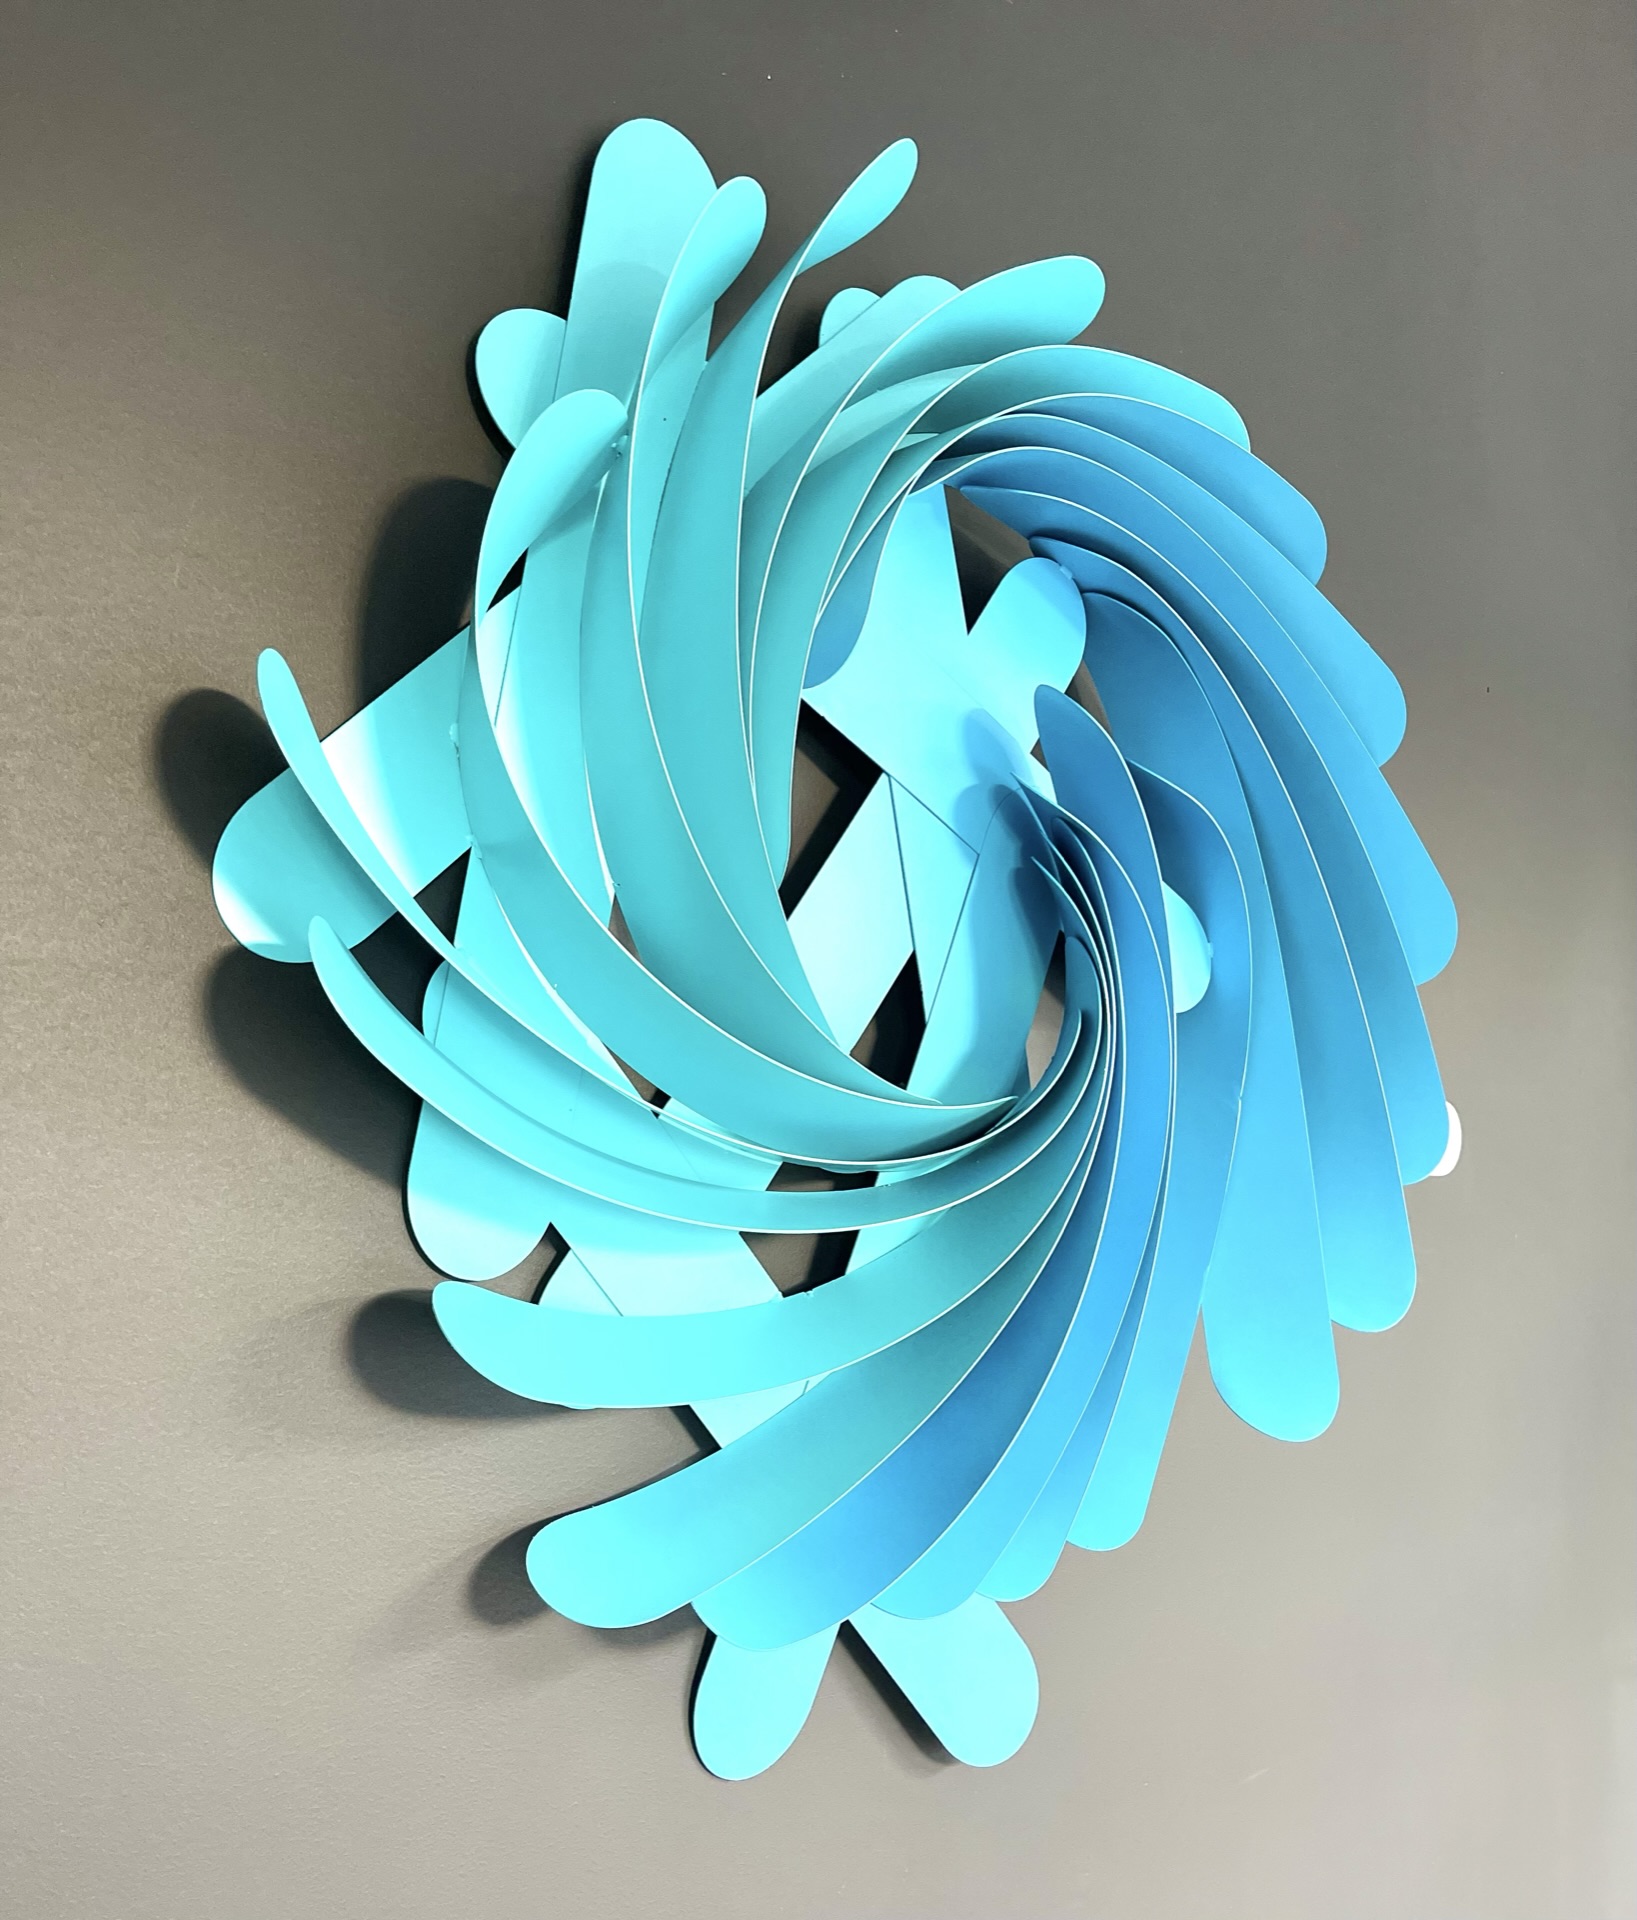 Azzele Wall Sculpture